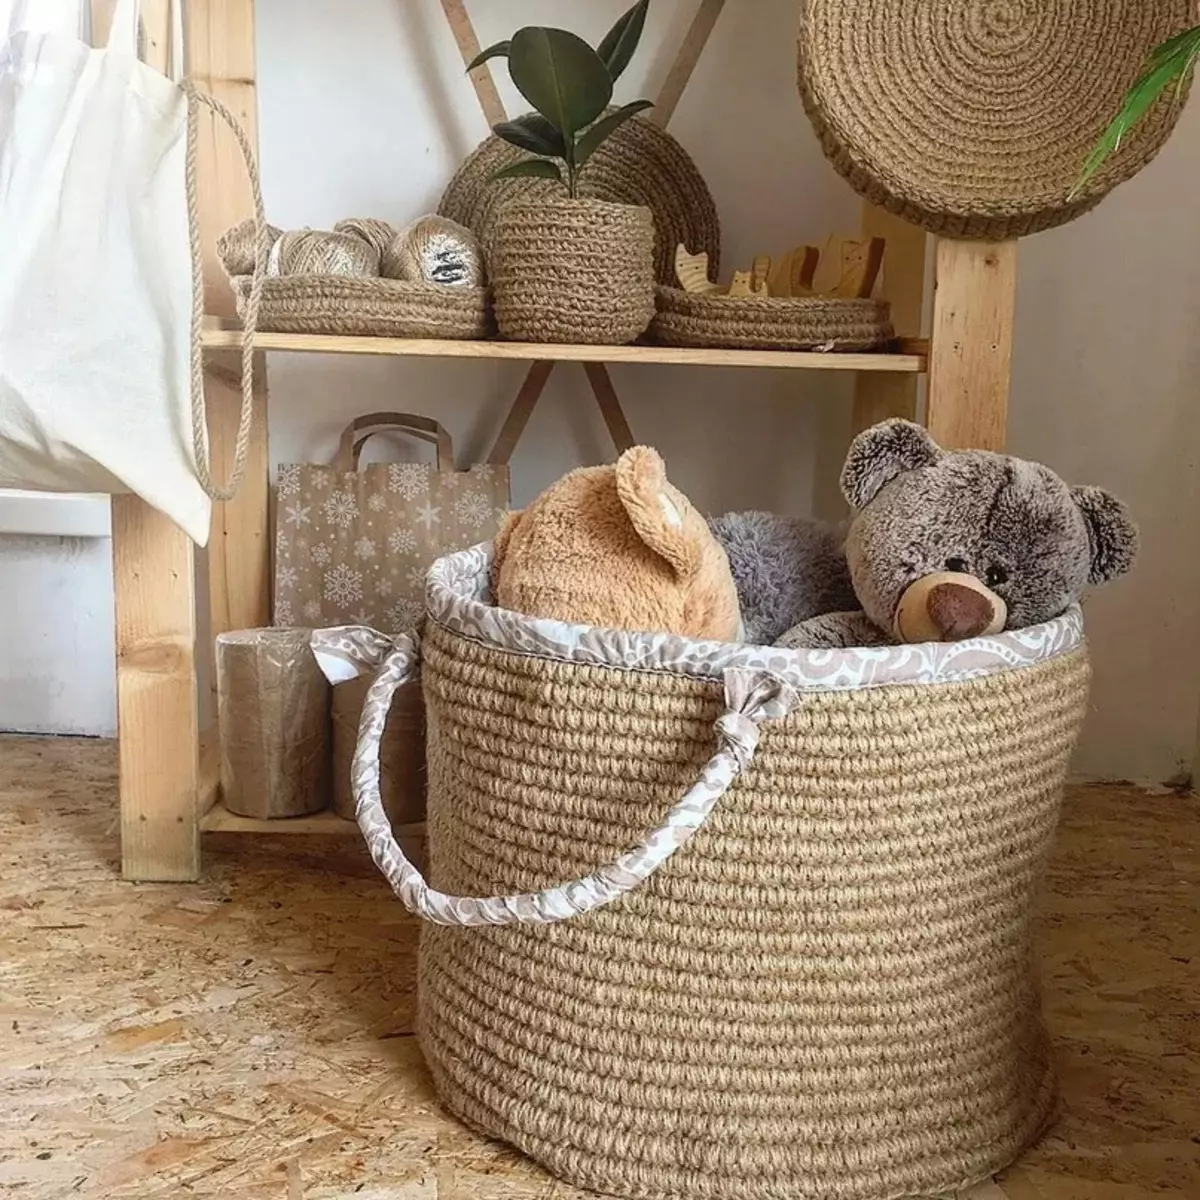 Baskets made of jute (49 photos): crochet baskets with your own hands, laundry basket with solid walls and other ideas, master classes 26917_5